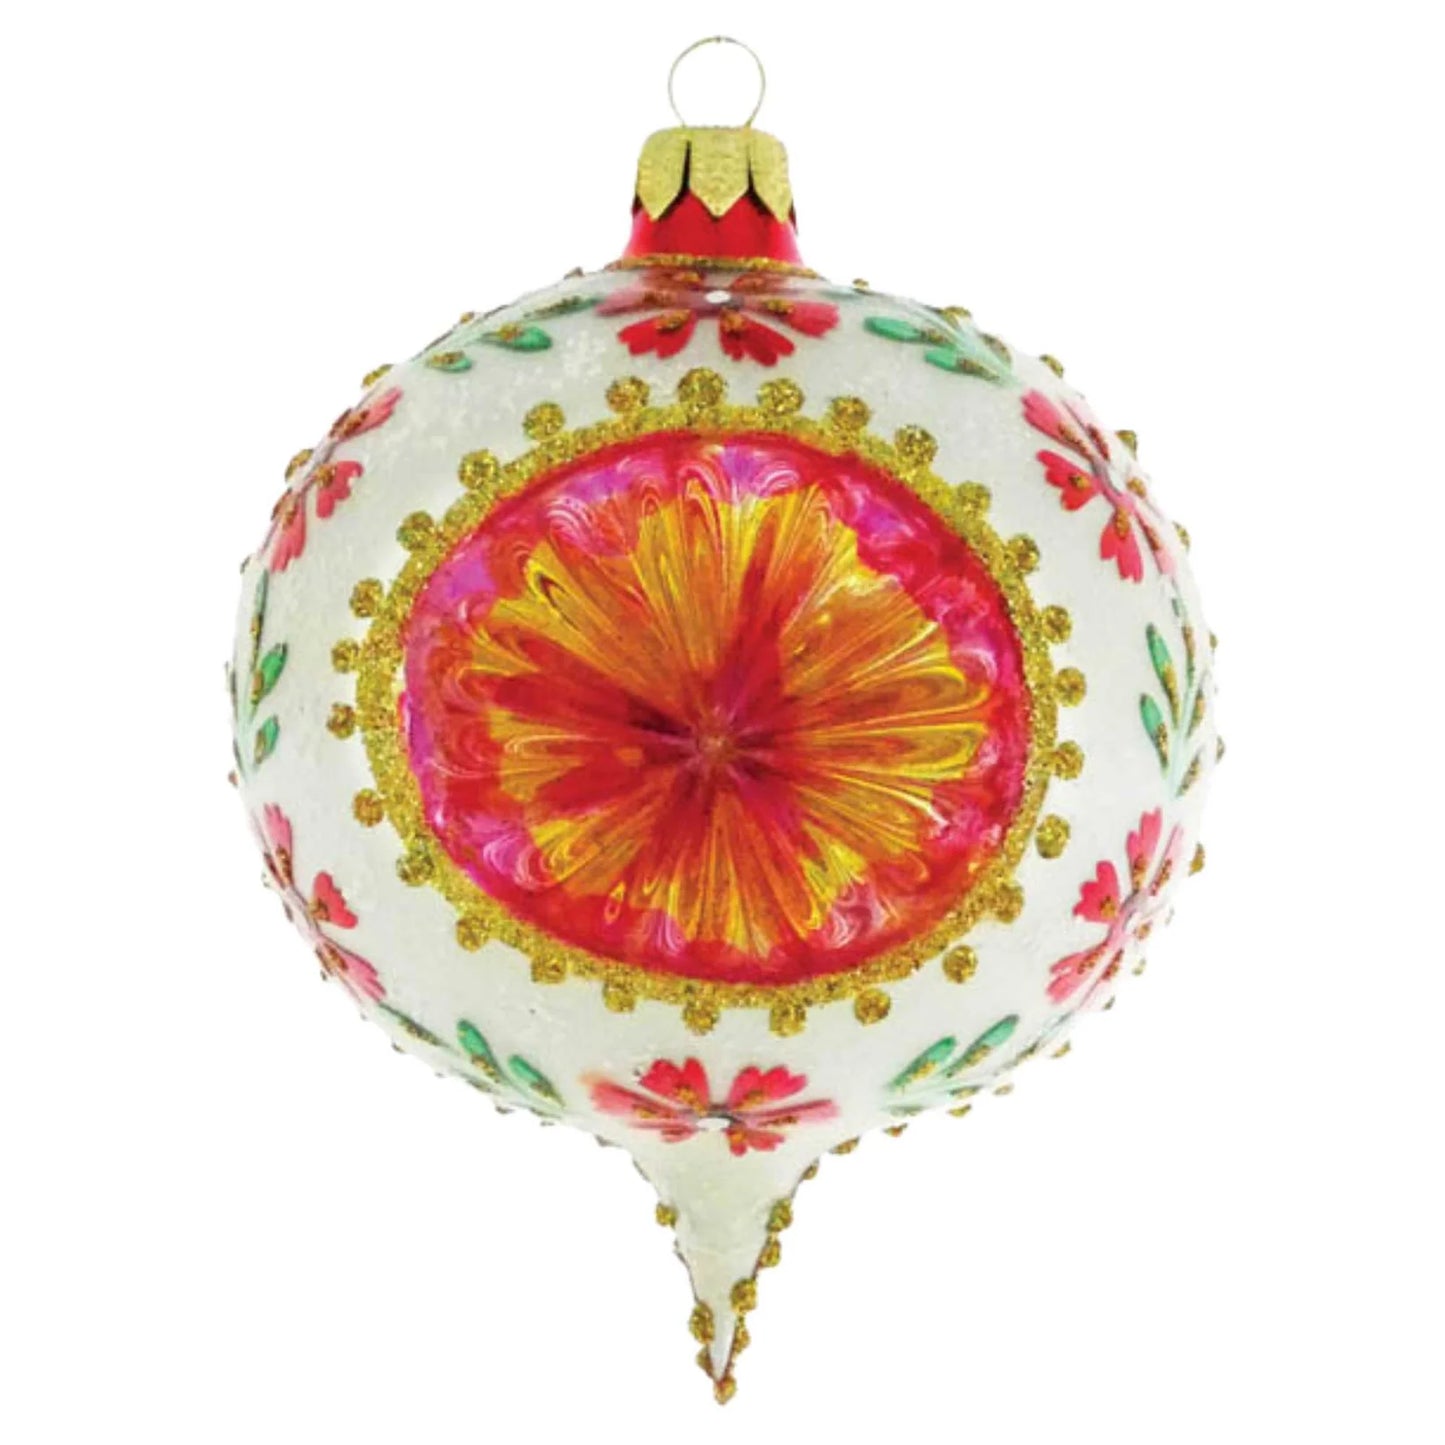 Heartfully Yours Bright Woodsong Deluxe Christmas ornament Christopher Radko 